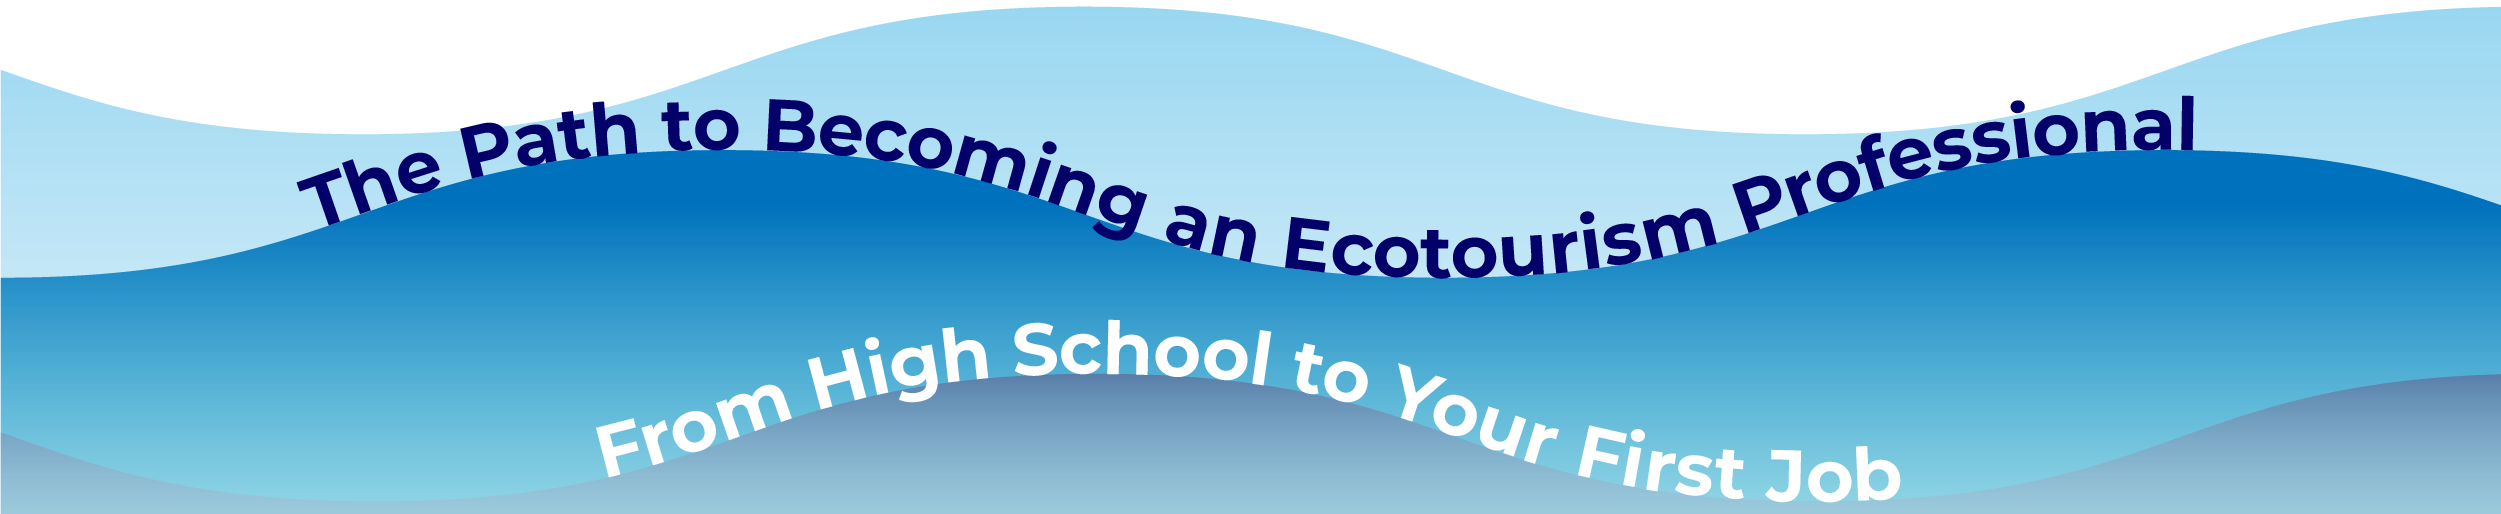 The path to becoming an Ecotourism Professional